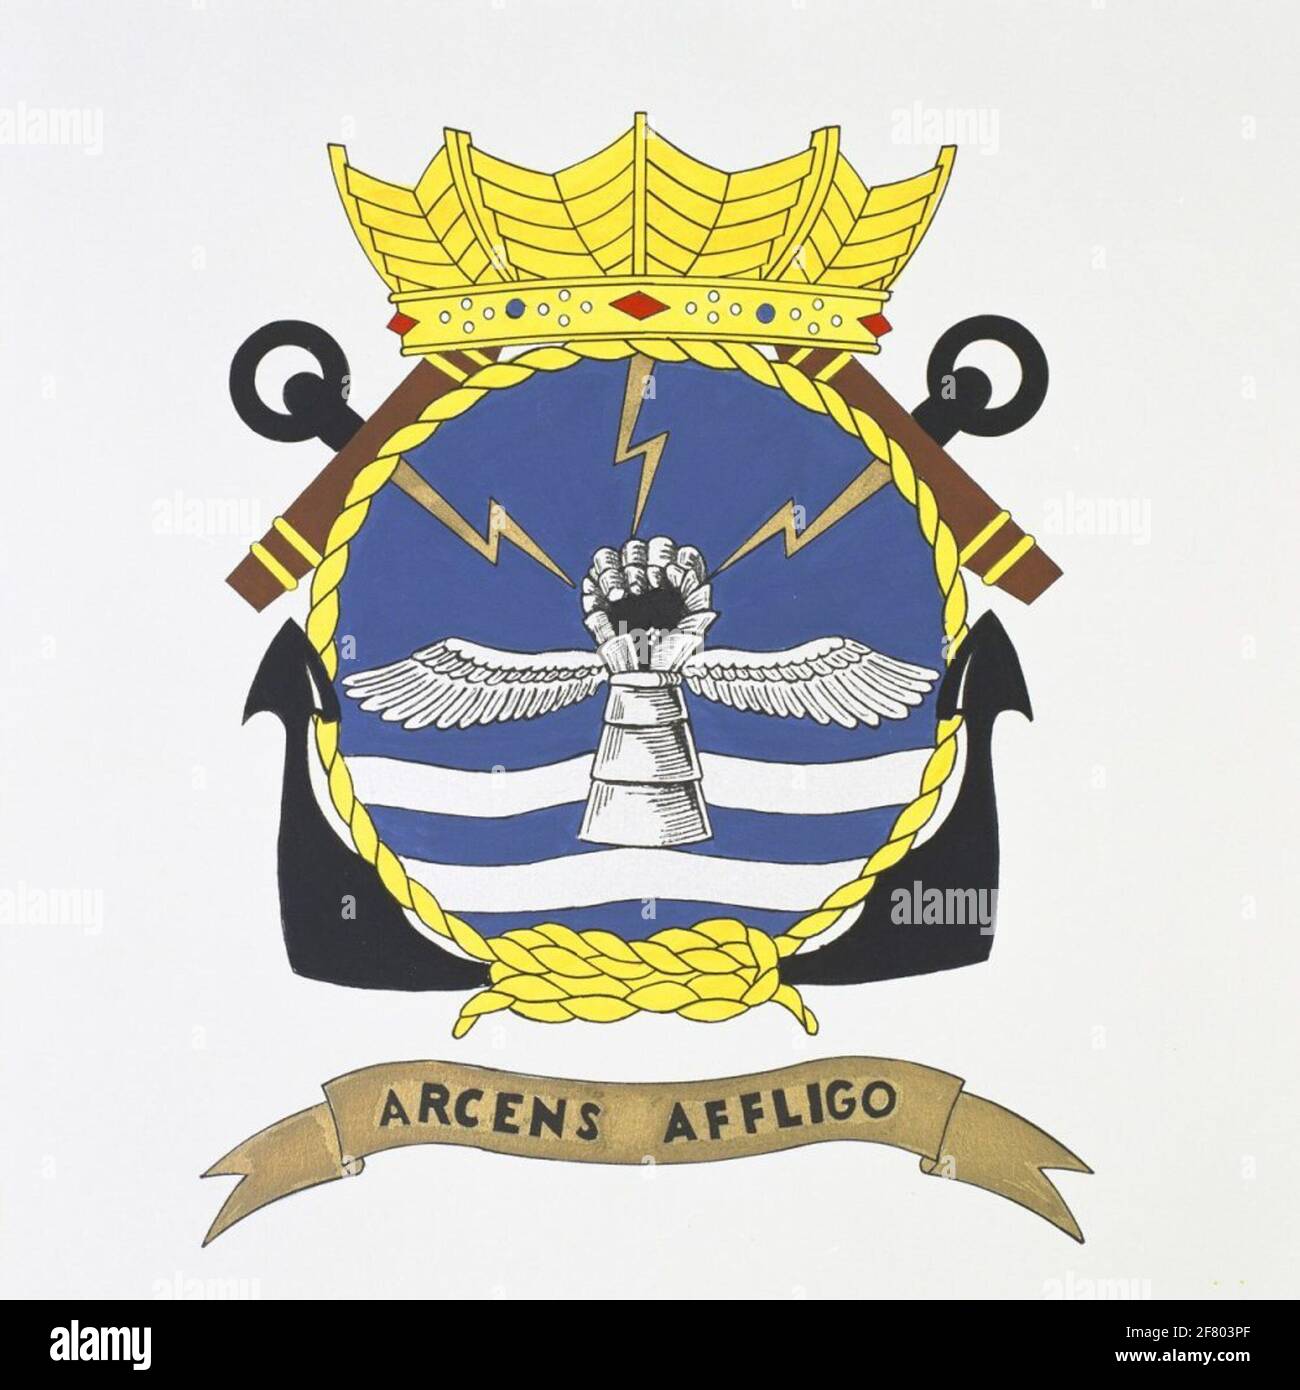 Squadron 860 (SQ 860). From a flight camp company, this Squadron had to float enemy attacks. These attacks are depicted in the emblem by lightning bolts, the defense by the fist. On board Hr.Ms. Karel Doorman (1948-1968) Arcens AFFLIGO (Developing I find) sometimes translated with 'thready throwing'. Nowadays Squadron uses 860 helicopters to operate from the frigates. Stock Photo